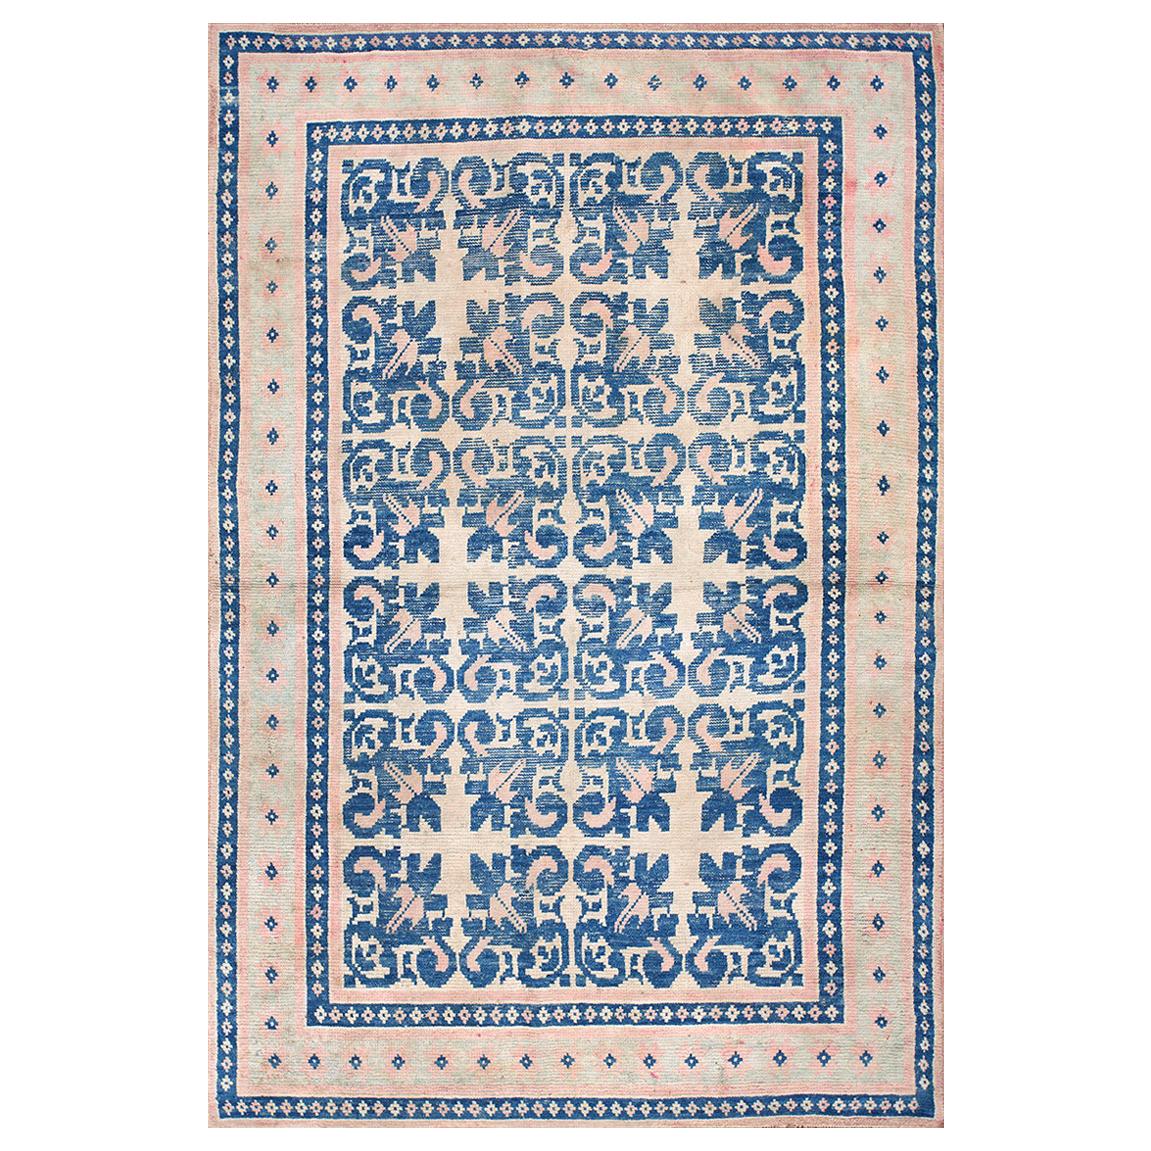 Antique Indian Agra Cotton For Sale